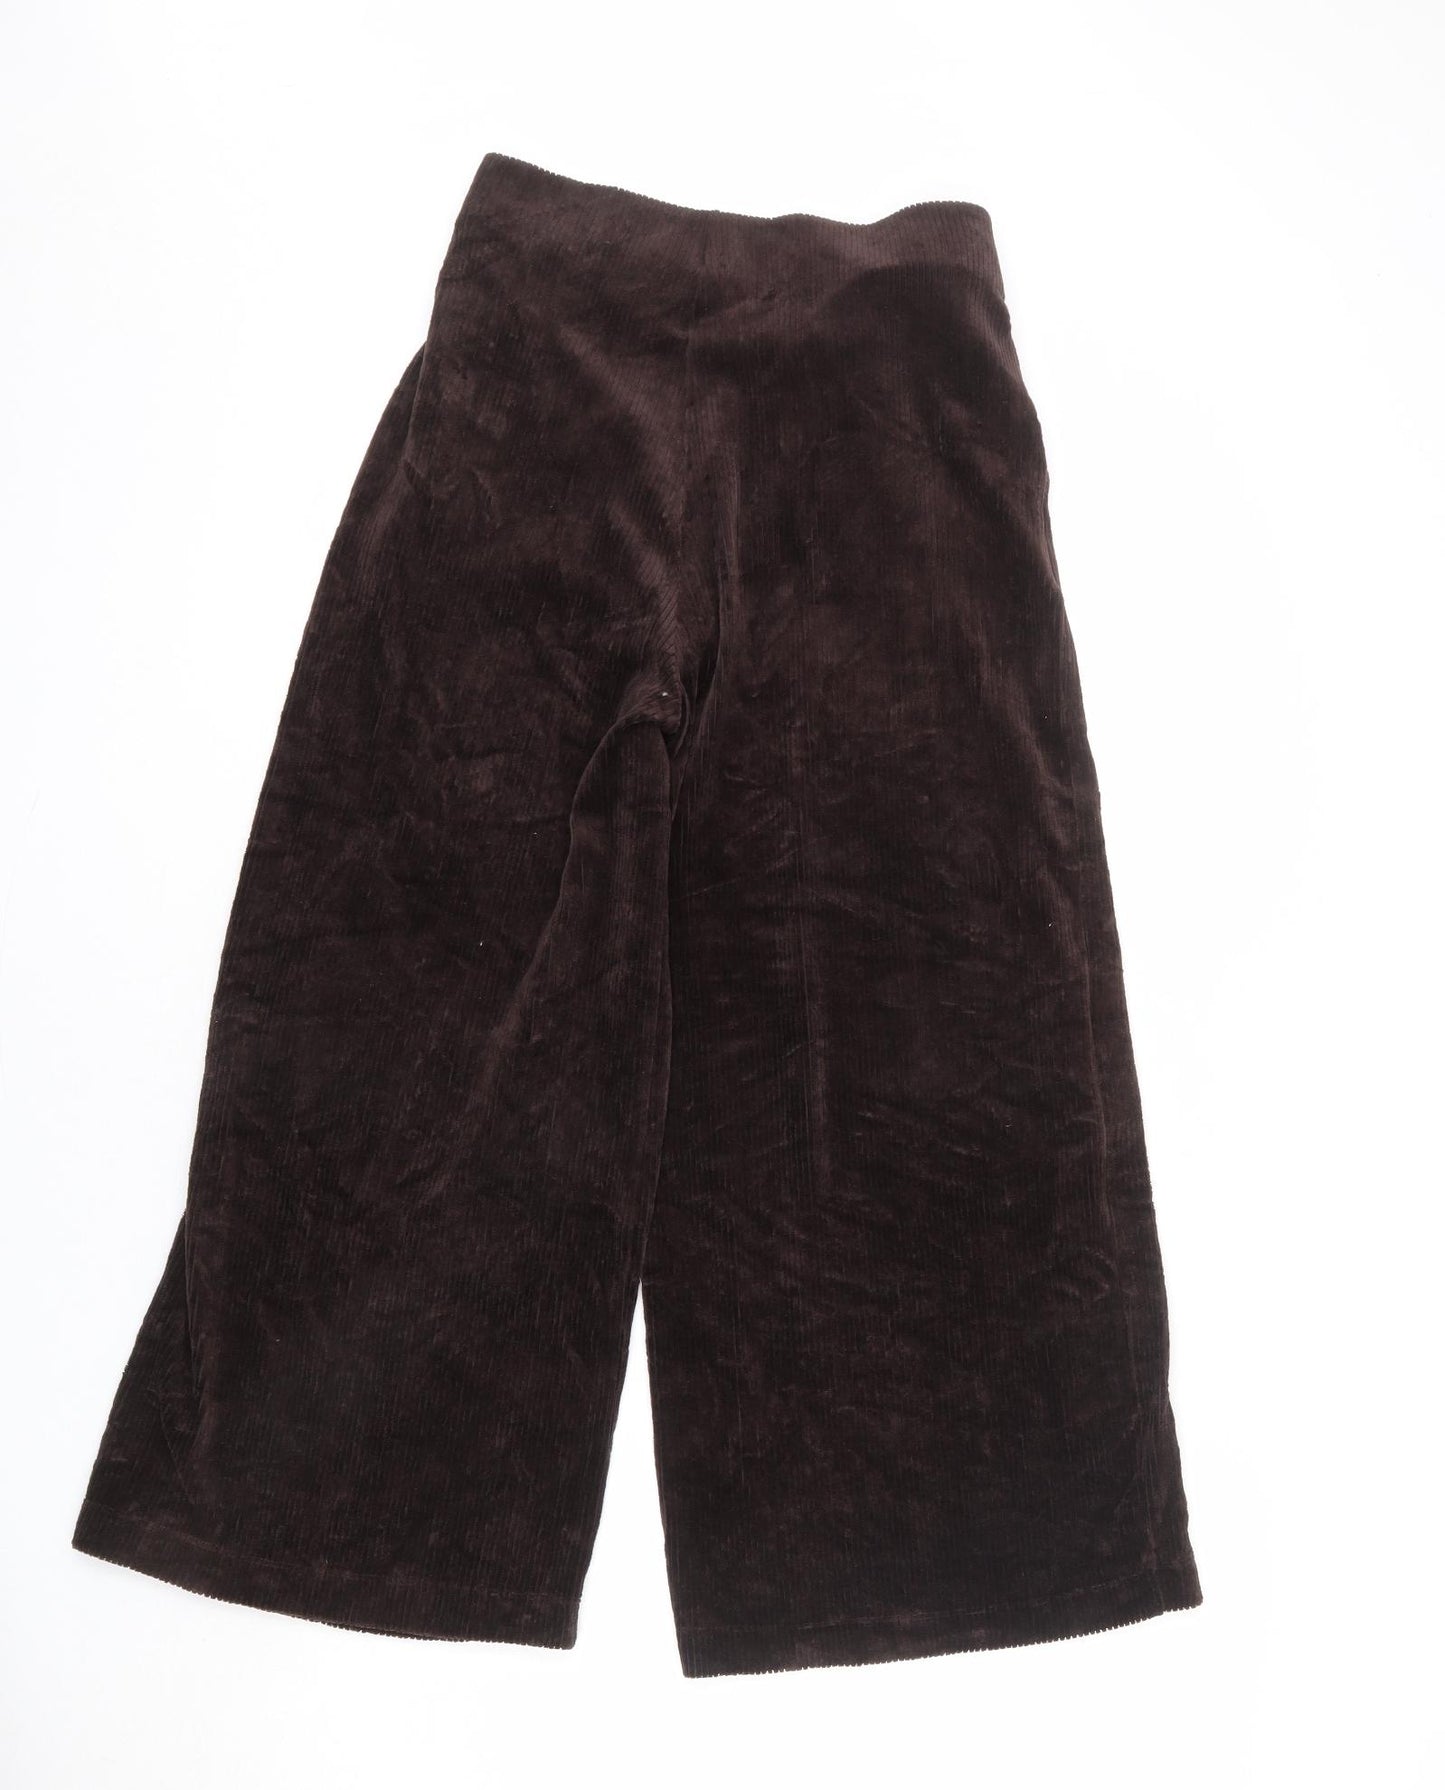 Marks and Spencer Womens Brown Cotton Trousers Size 10 L23 in Regular - Short Length